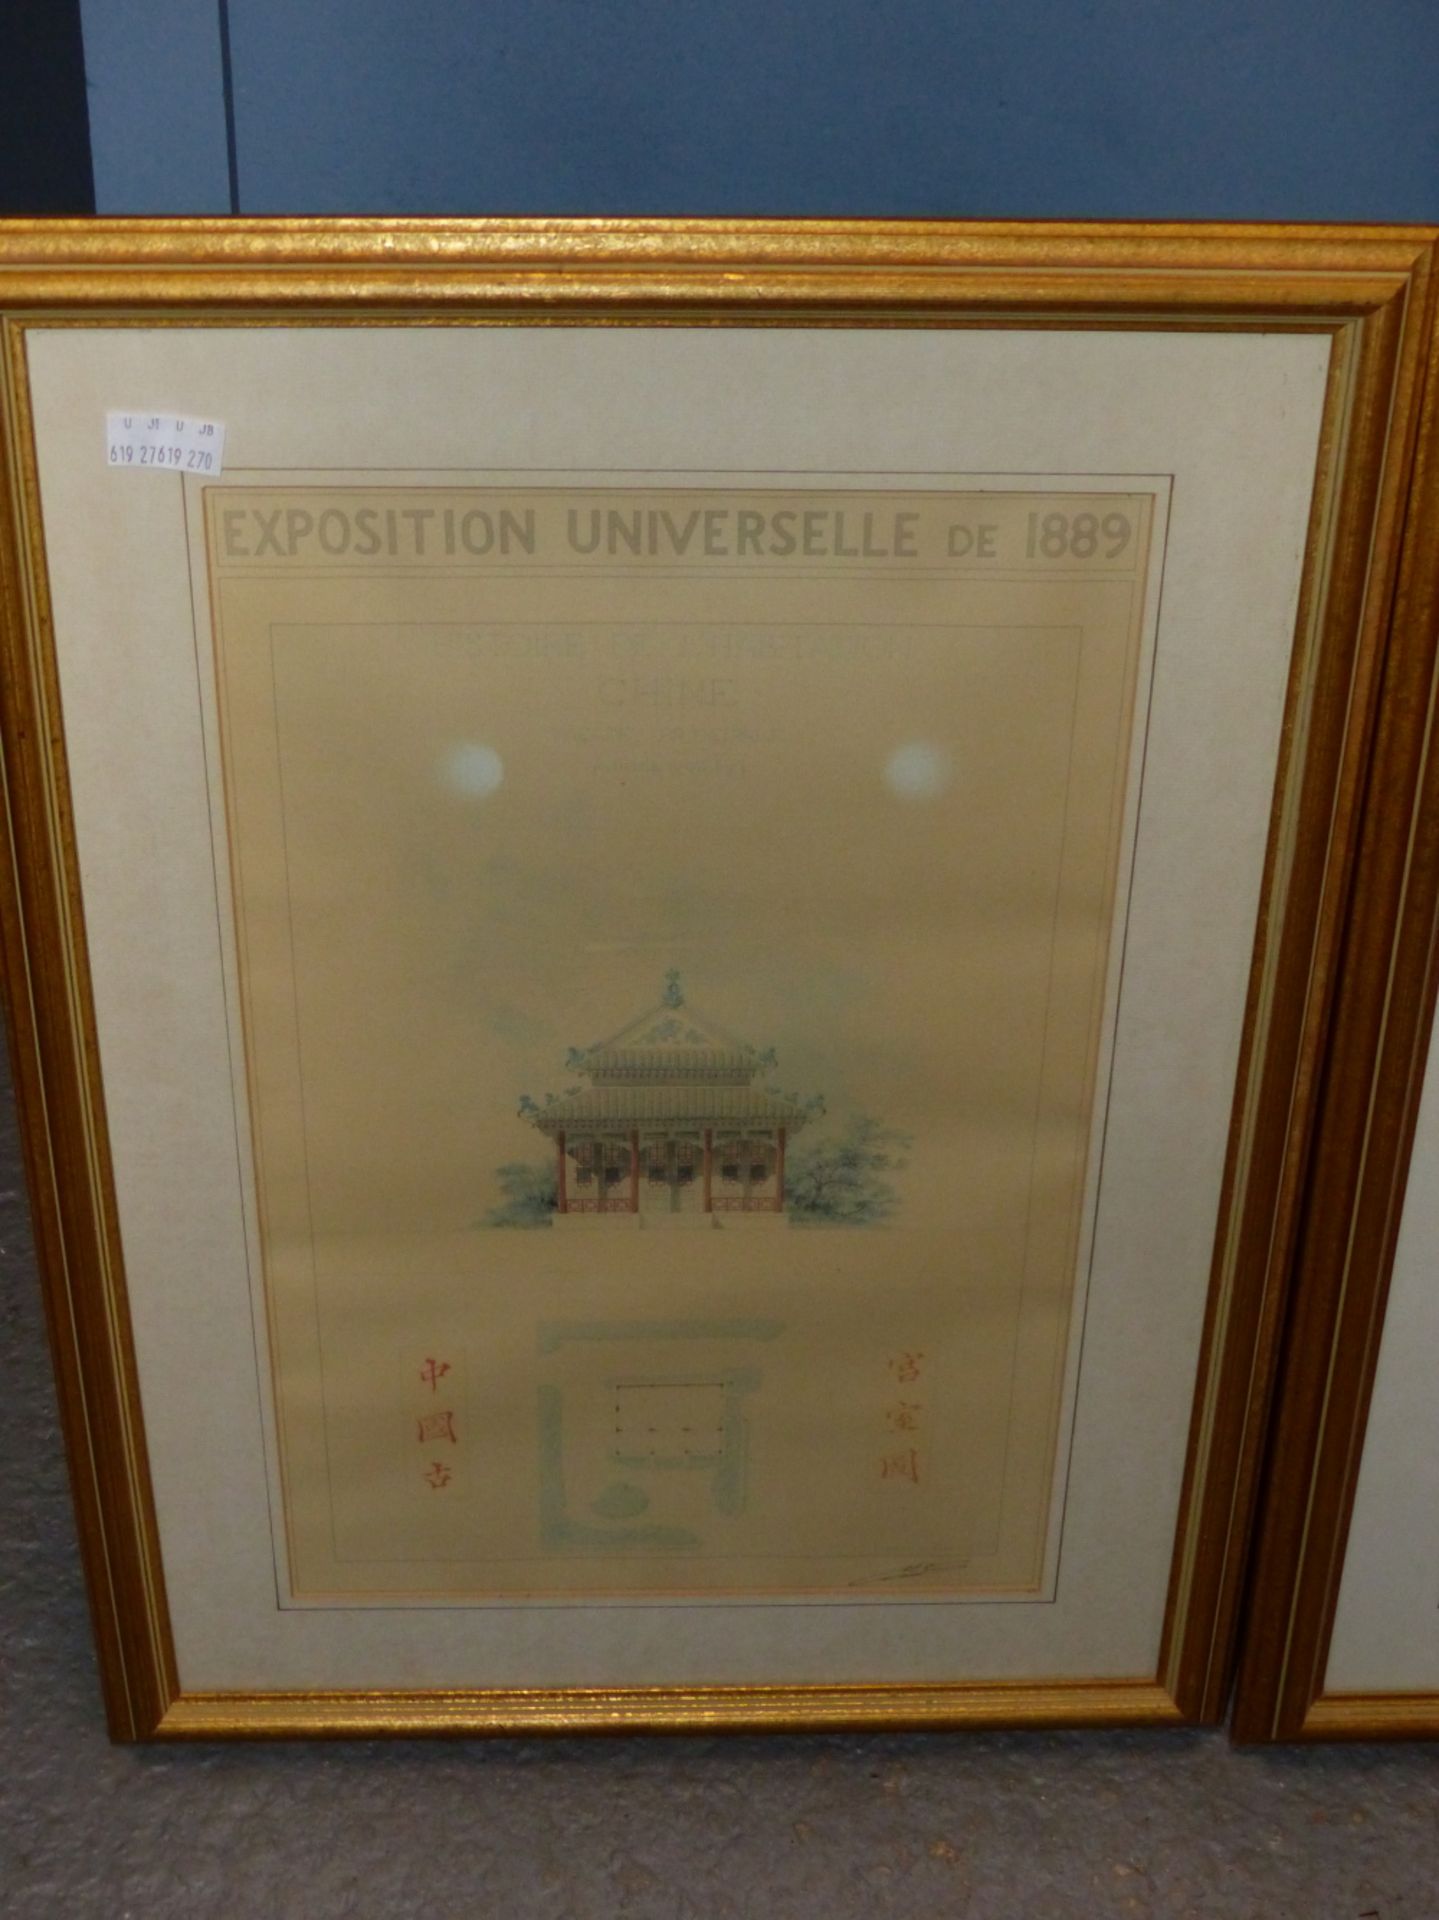 TWO PRINTS OF POSTERS FROM THE EXPOSITION UNIVERSELLE DE 1889, SHOWING THE HOUSE STYLES OF CHINA AND - Image 2 of 4